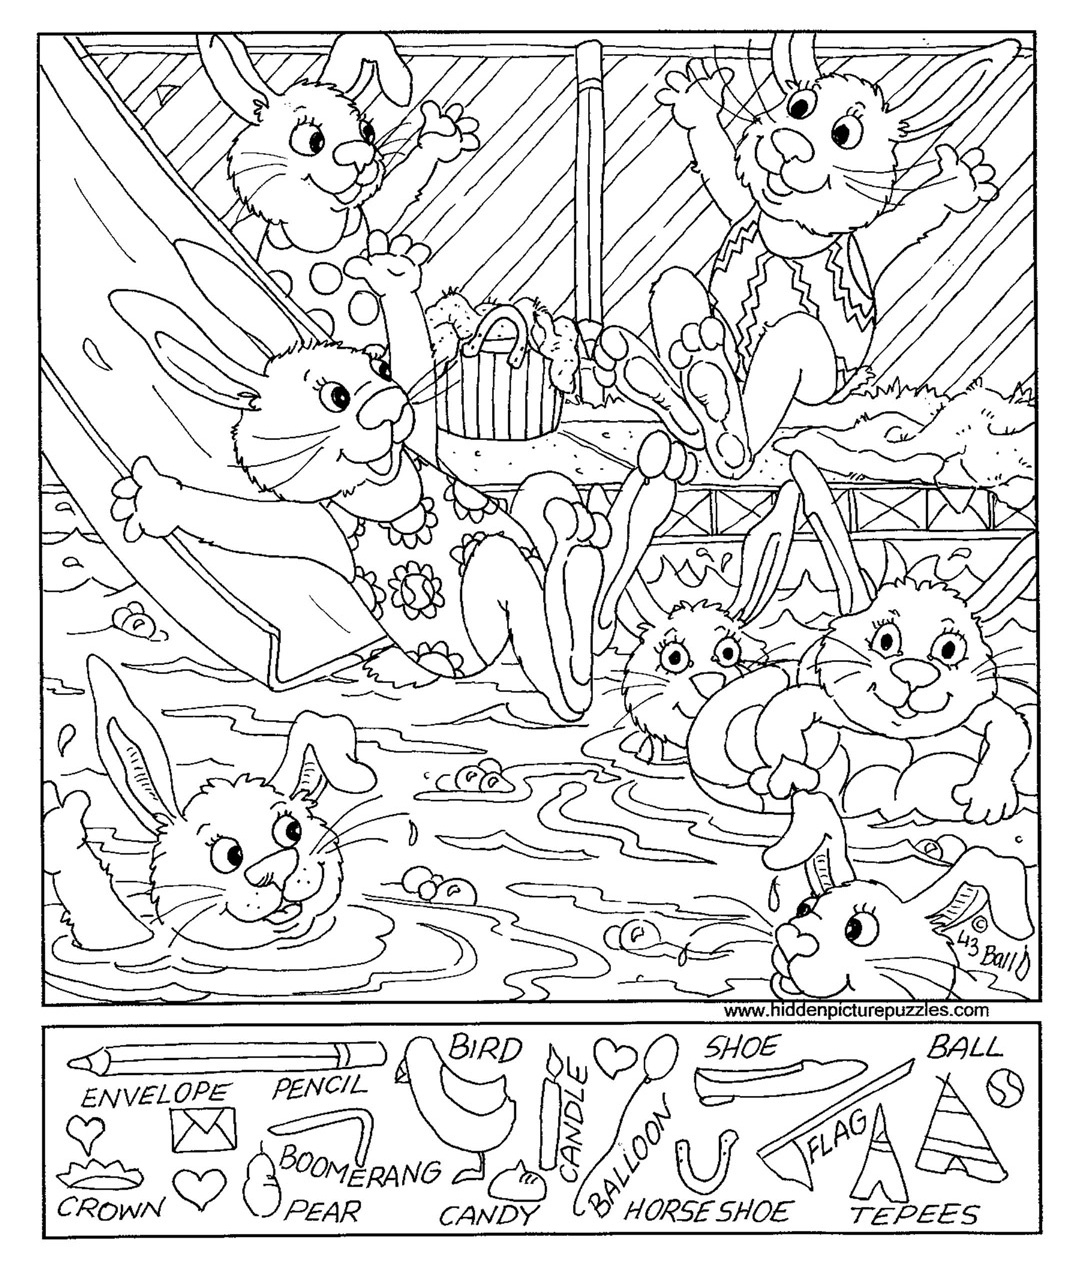 Happy easter hidden pictures coloring page â jeanie neal face